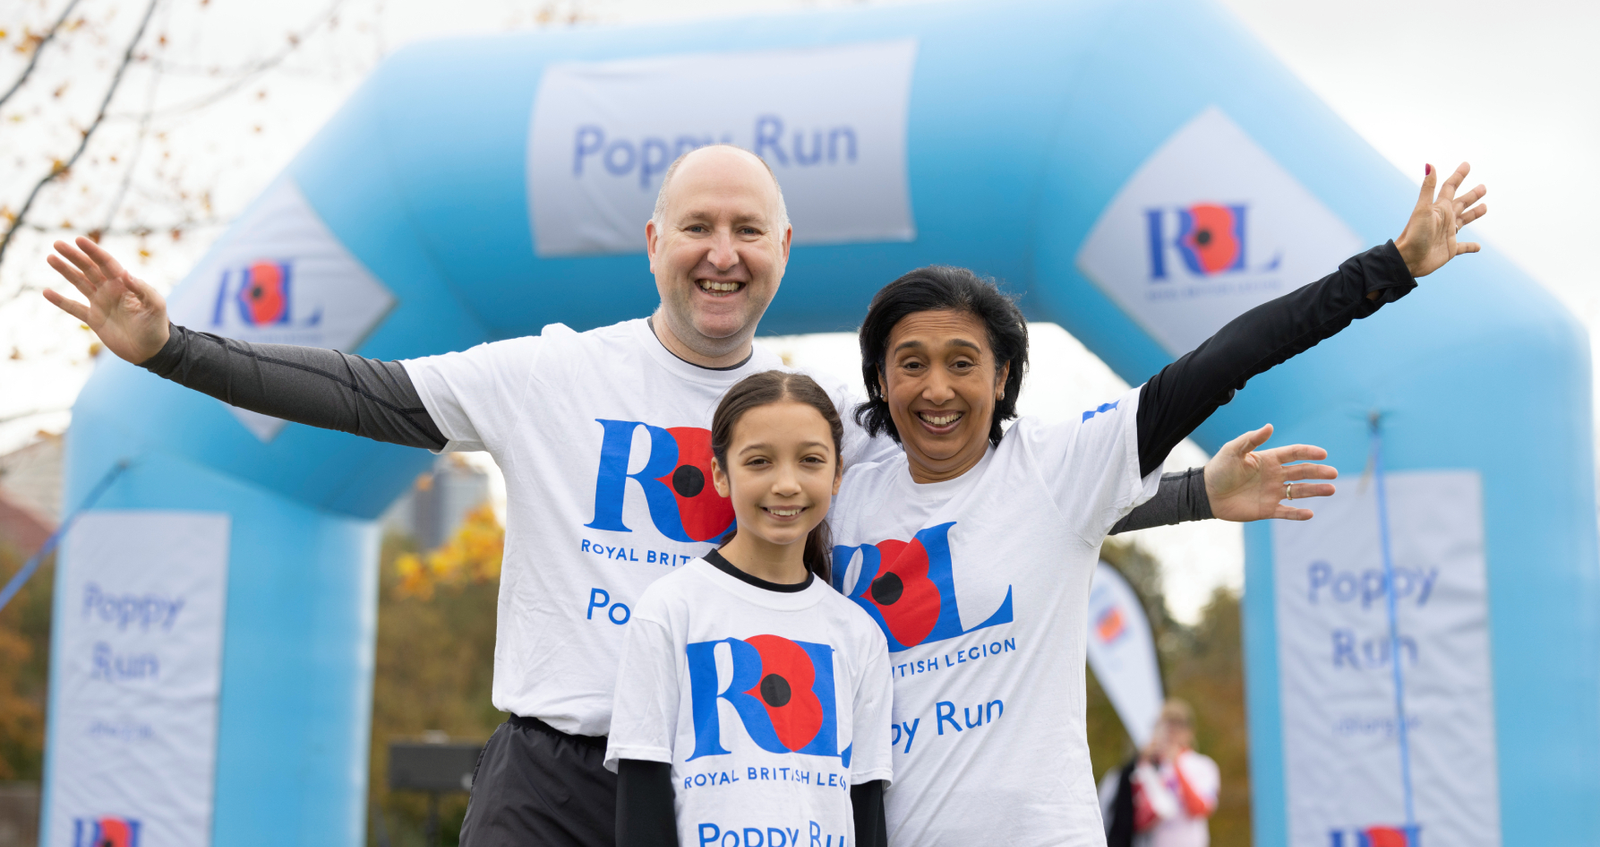 Family of three (father, mother and daughter) cheering at the Poppy Run entrance